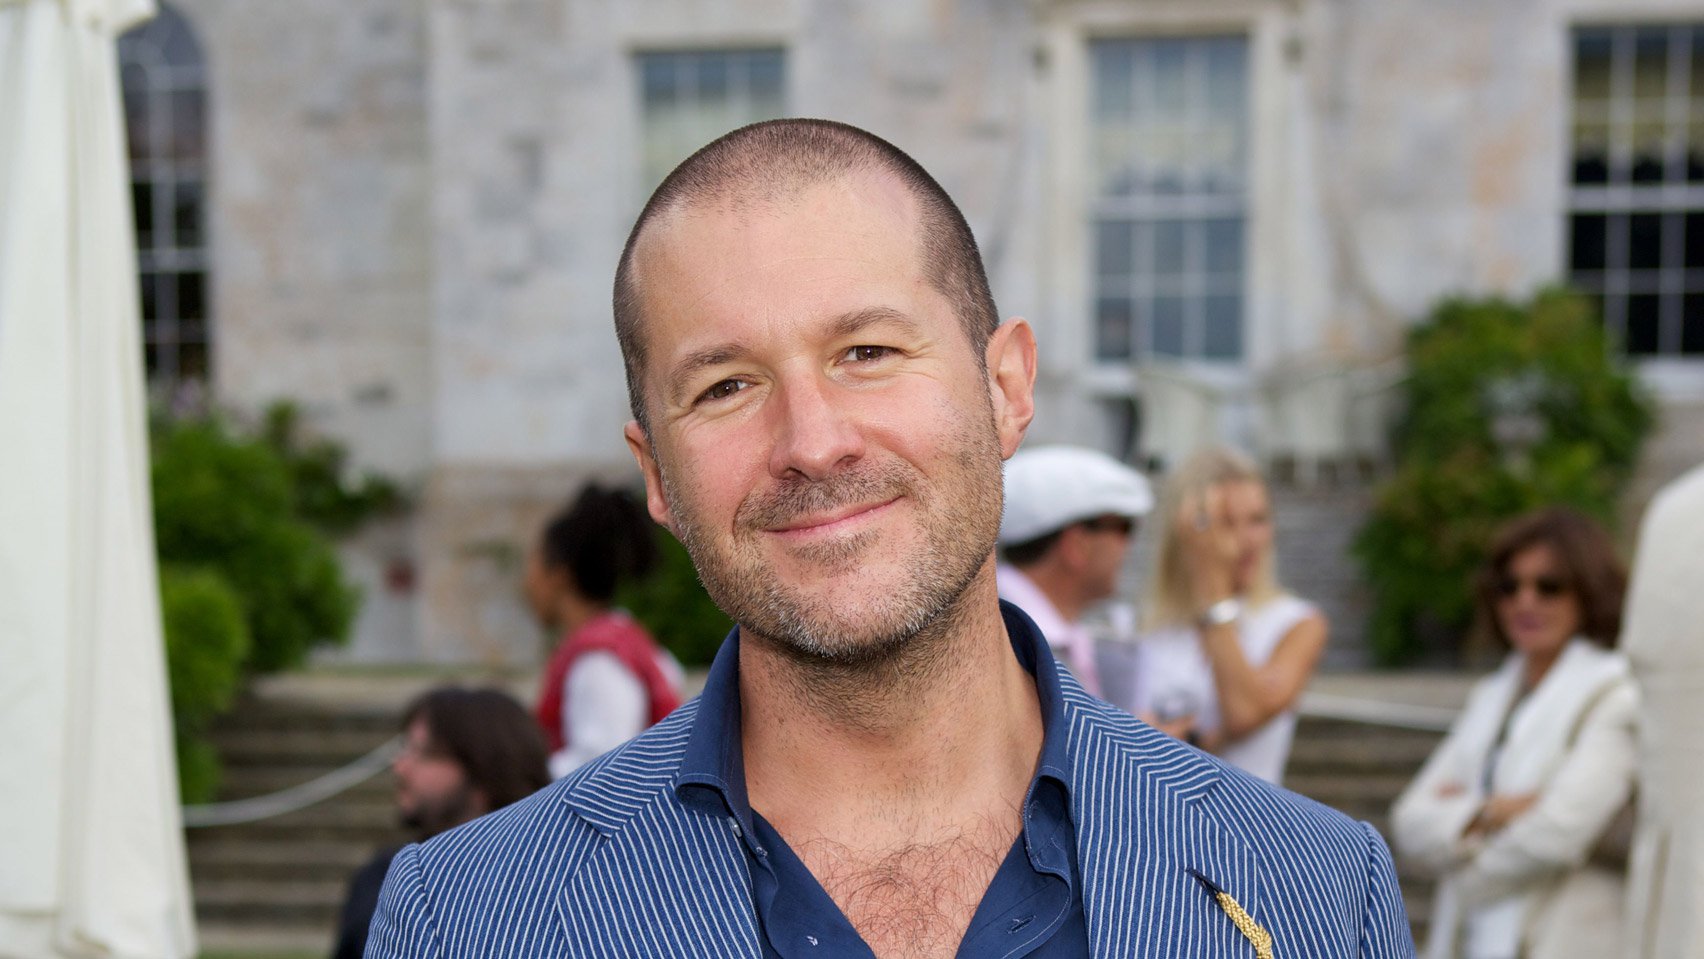 In an interview, Jony Ive talks about iPhone X: “It's not the conclusion of the iPhone, it's the beginning of a new chapter”